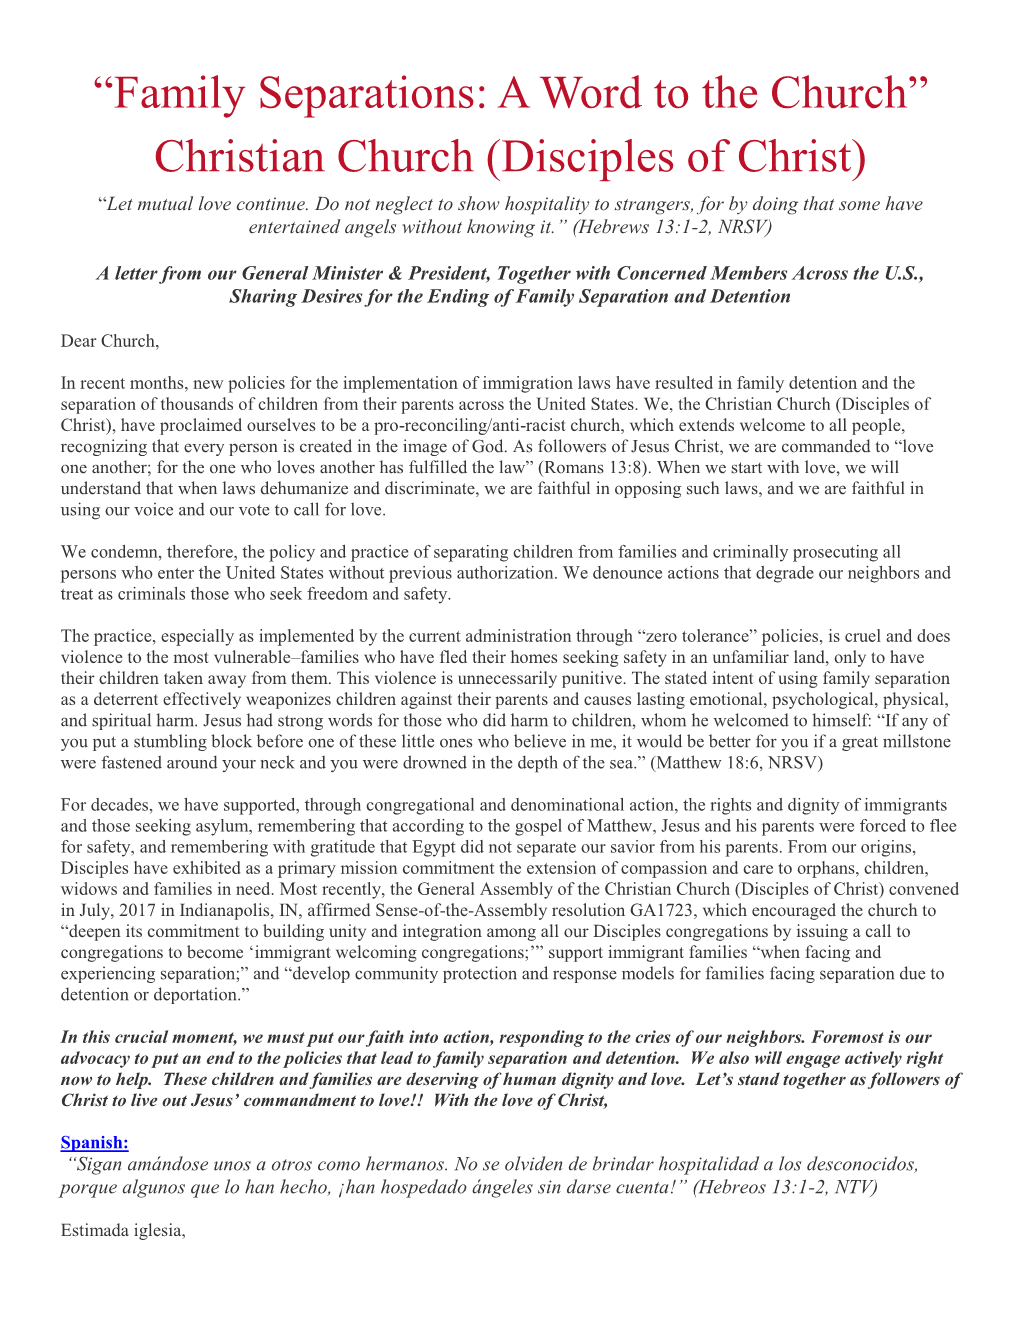 Christian Church (Disciples of Christ) “Let Mutual Love Continue